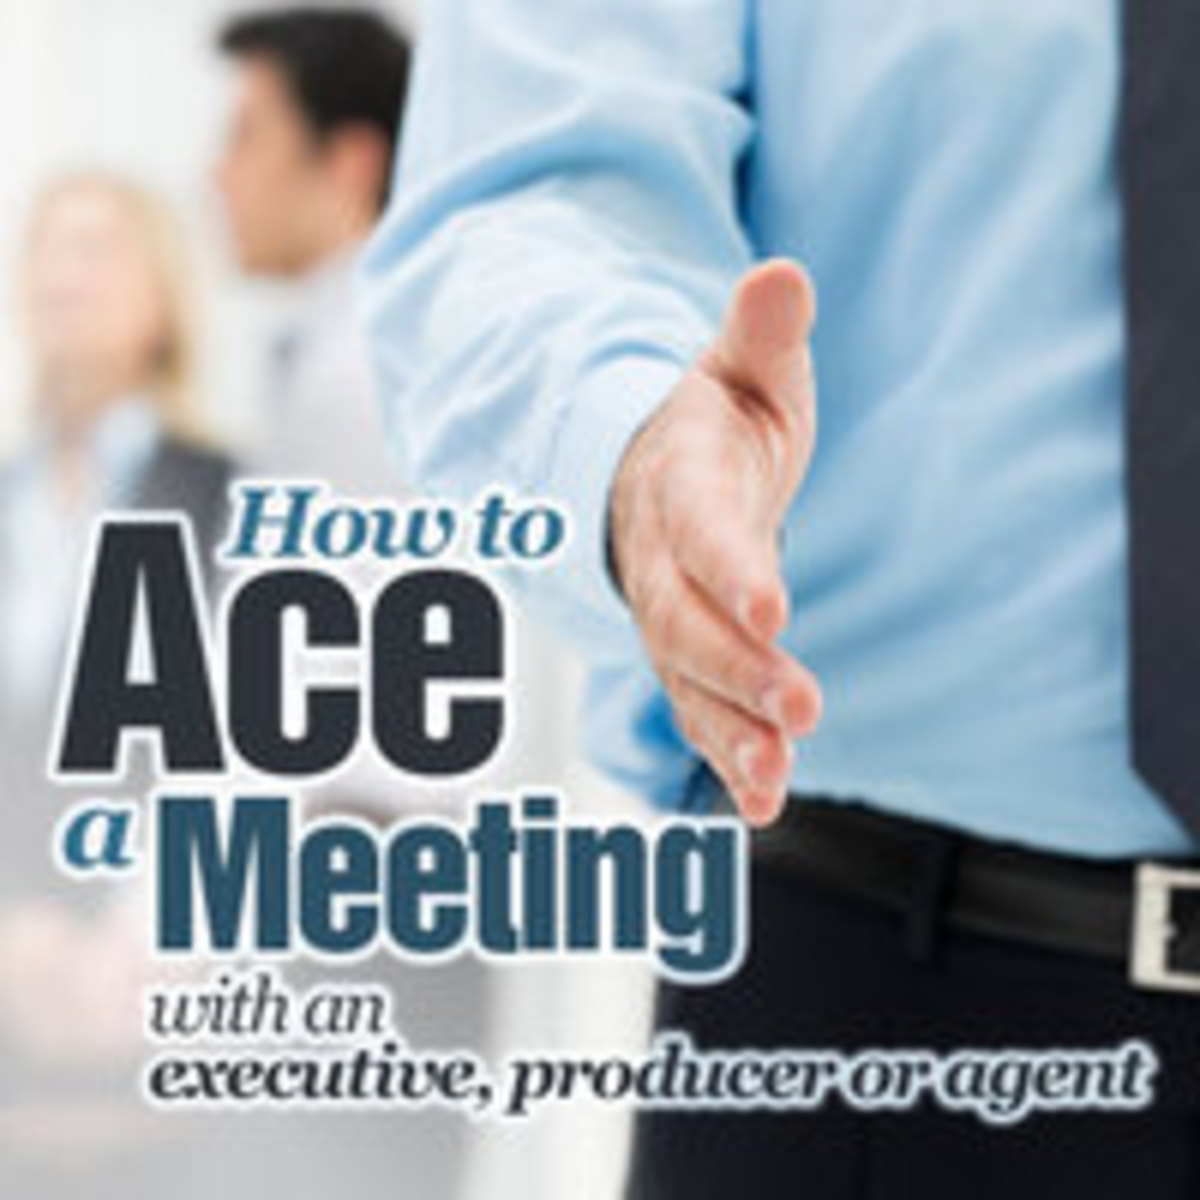 ws_acethemeeting-500_small